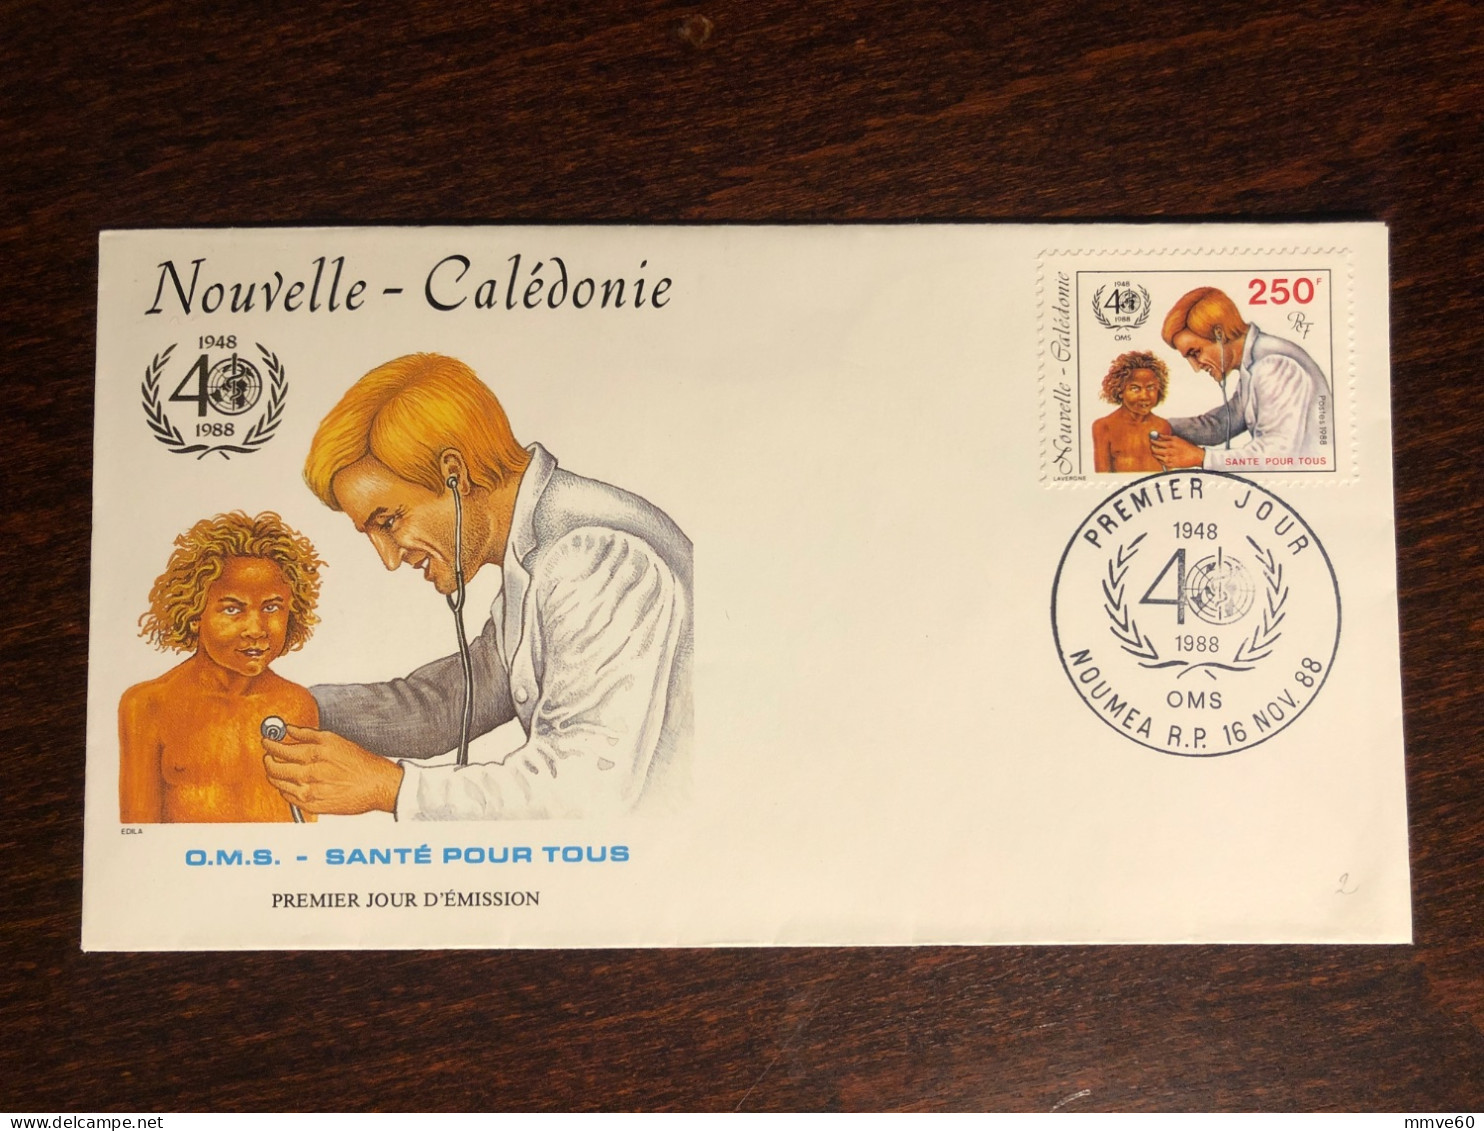 NEW CALEDONIA NOUVELLE CALEDONIE FDC COVER 1988 YEAR WHO HEALTH MEDICINE - Lettres & Documents